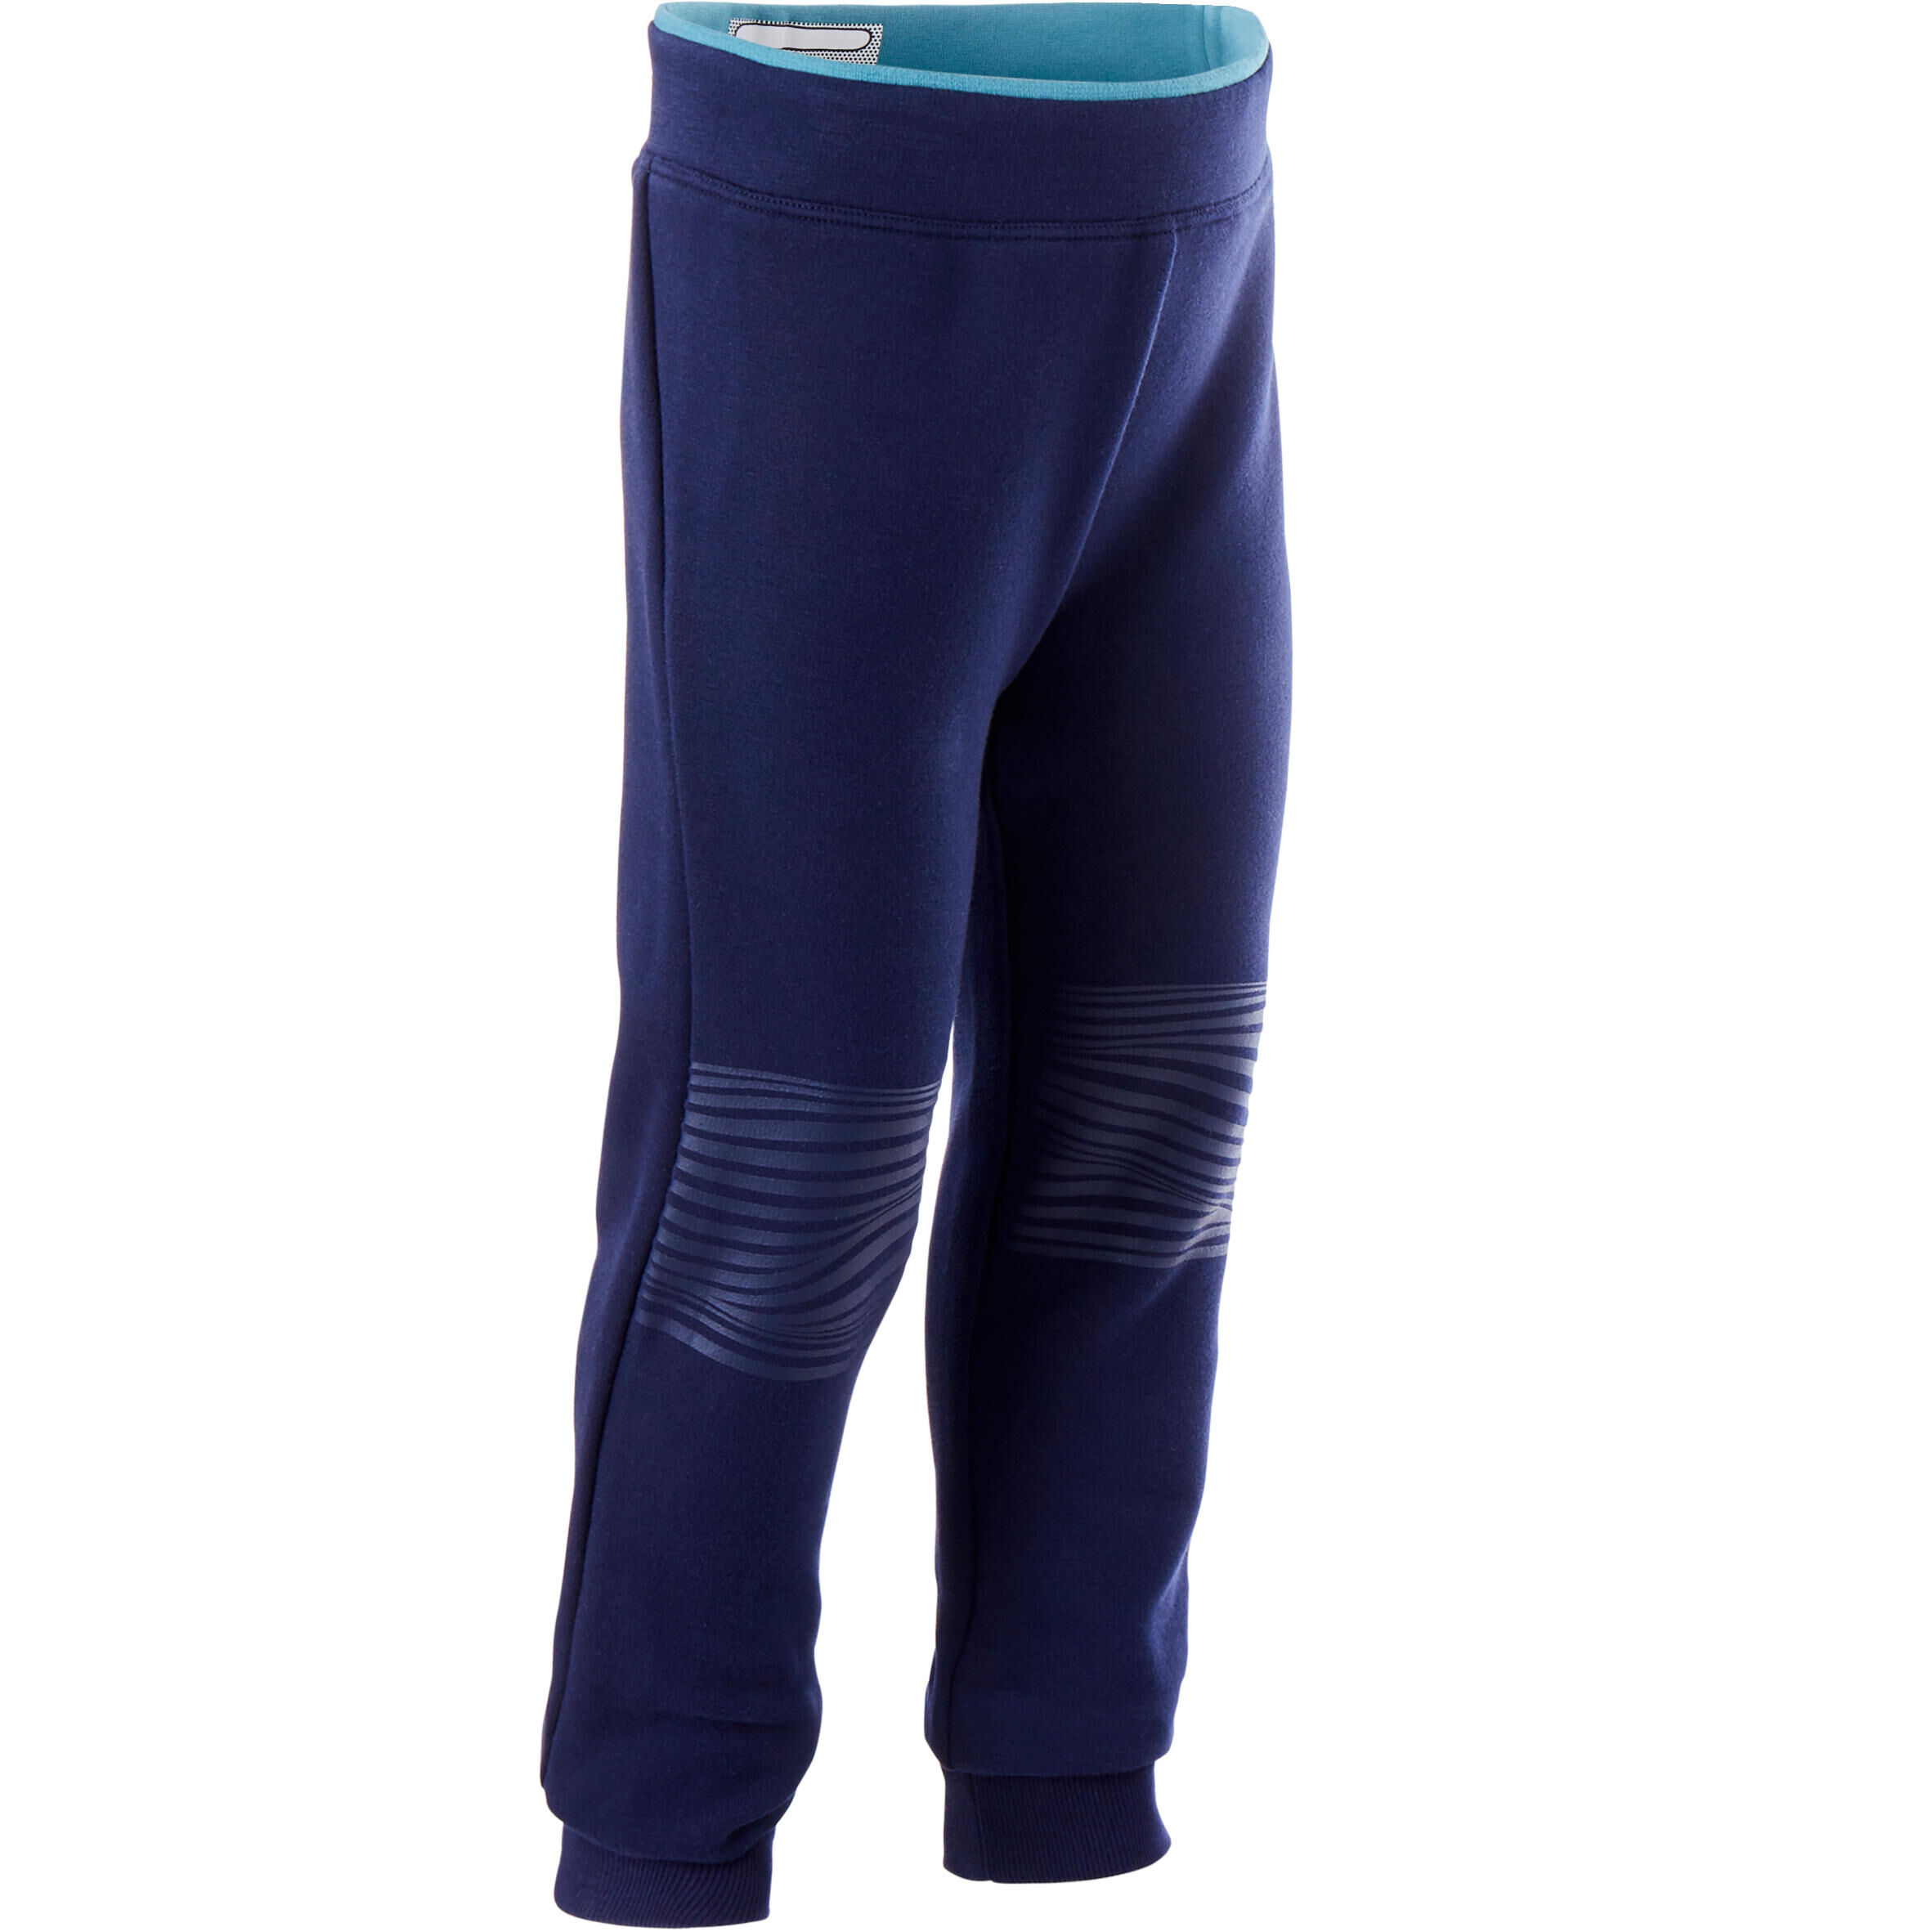 DOMYOS Kids' Baby Gym Breathable Slim-Fit Jogging Bottoms - Blue